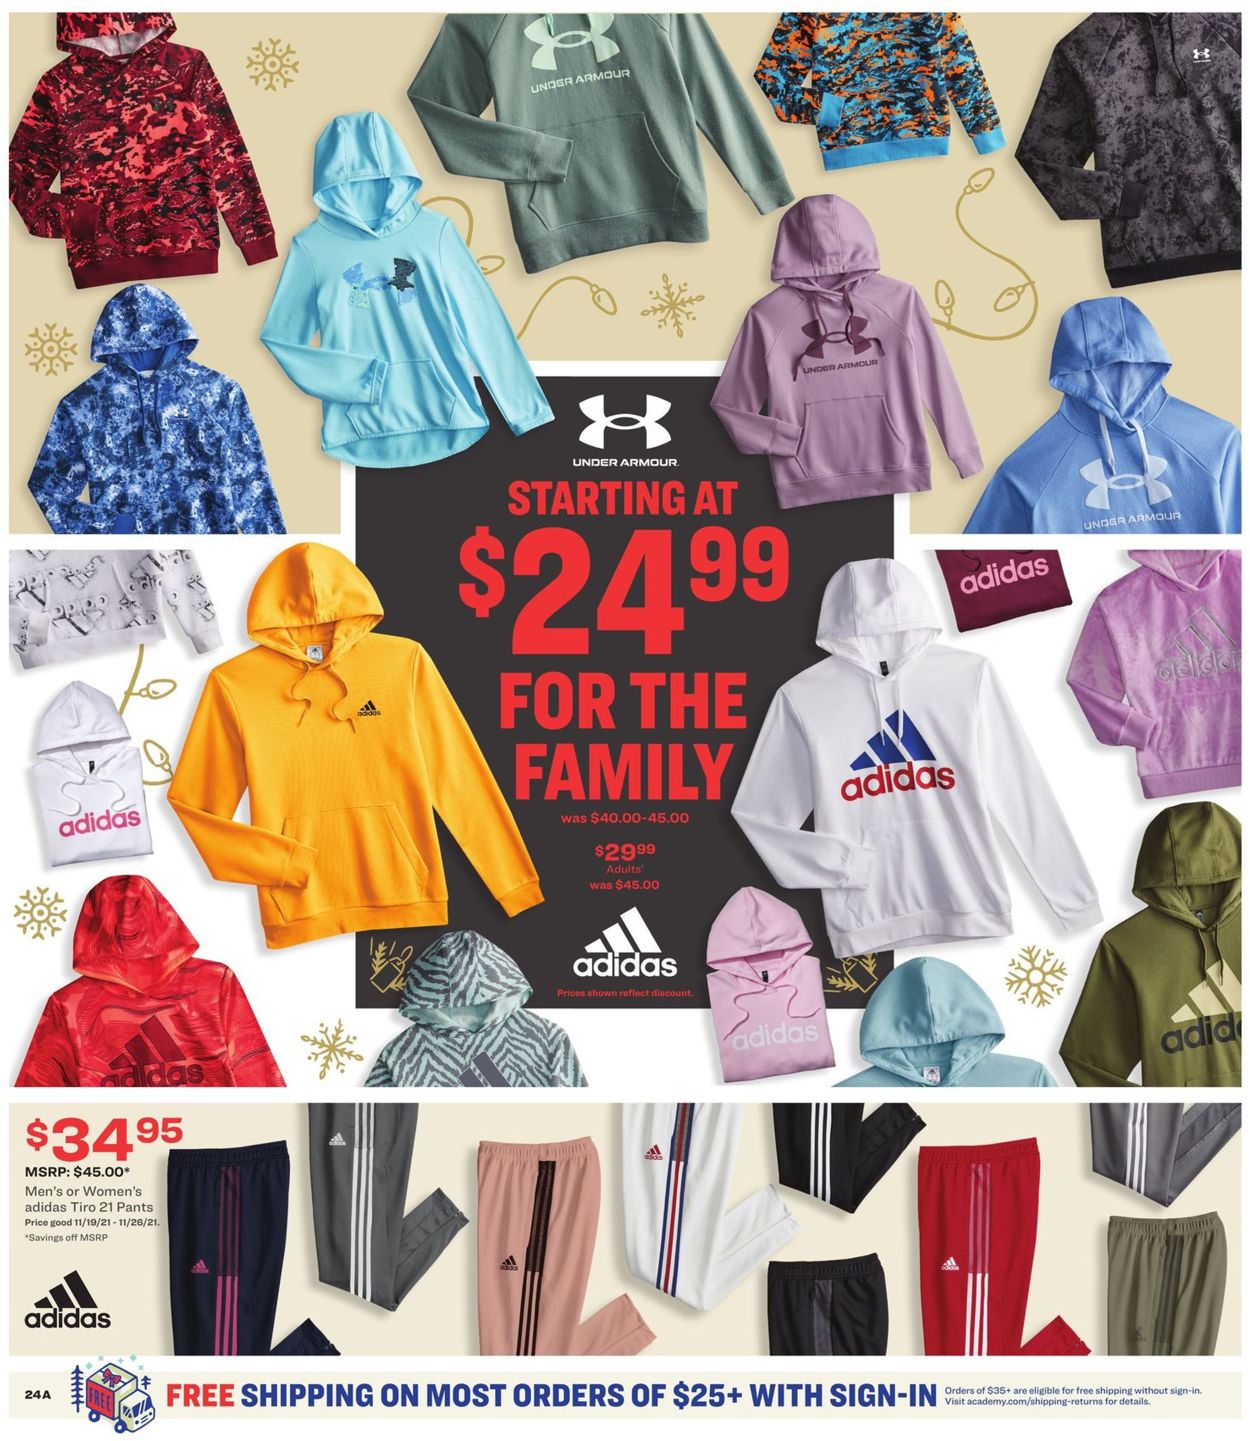 Academy Sports Ad from 11/23/2021